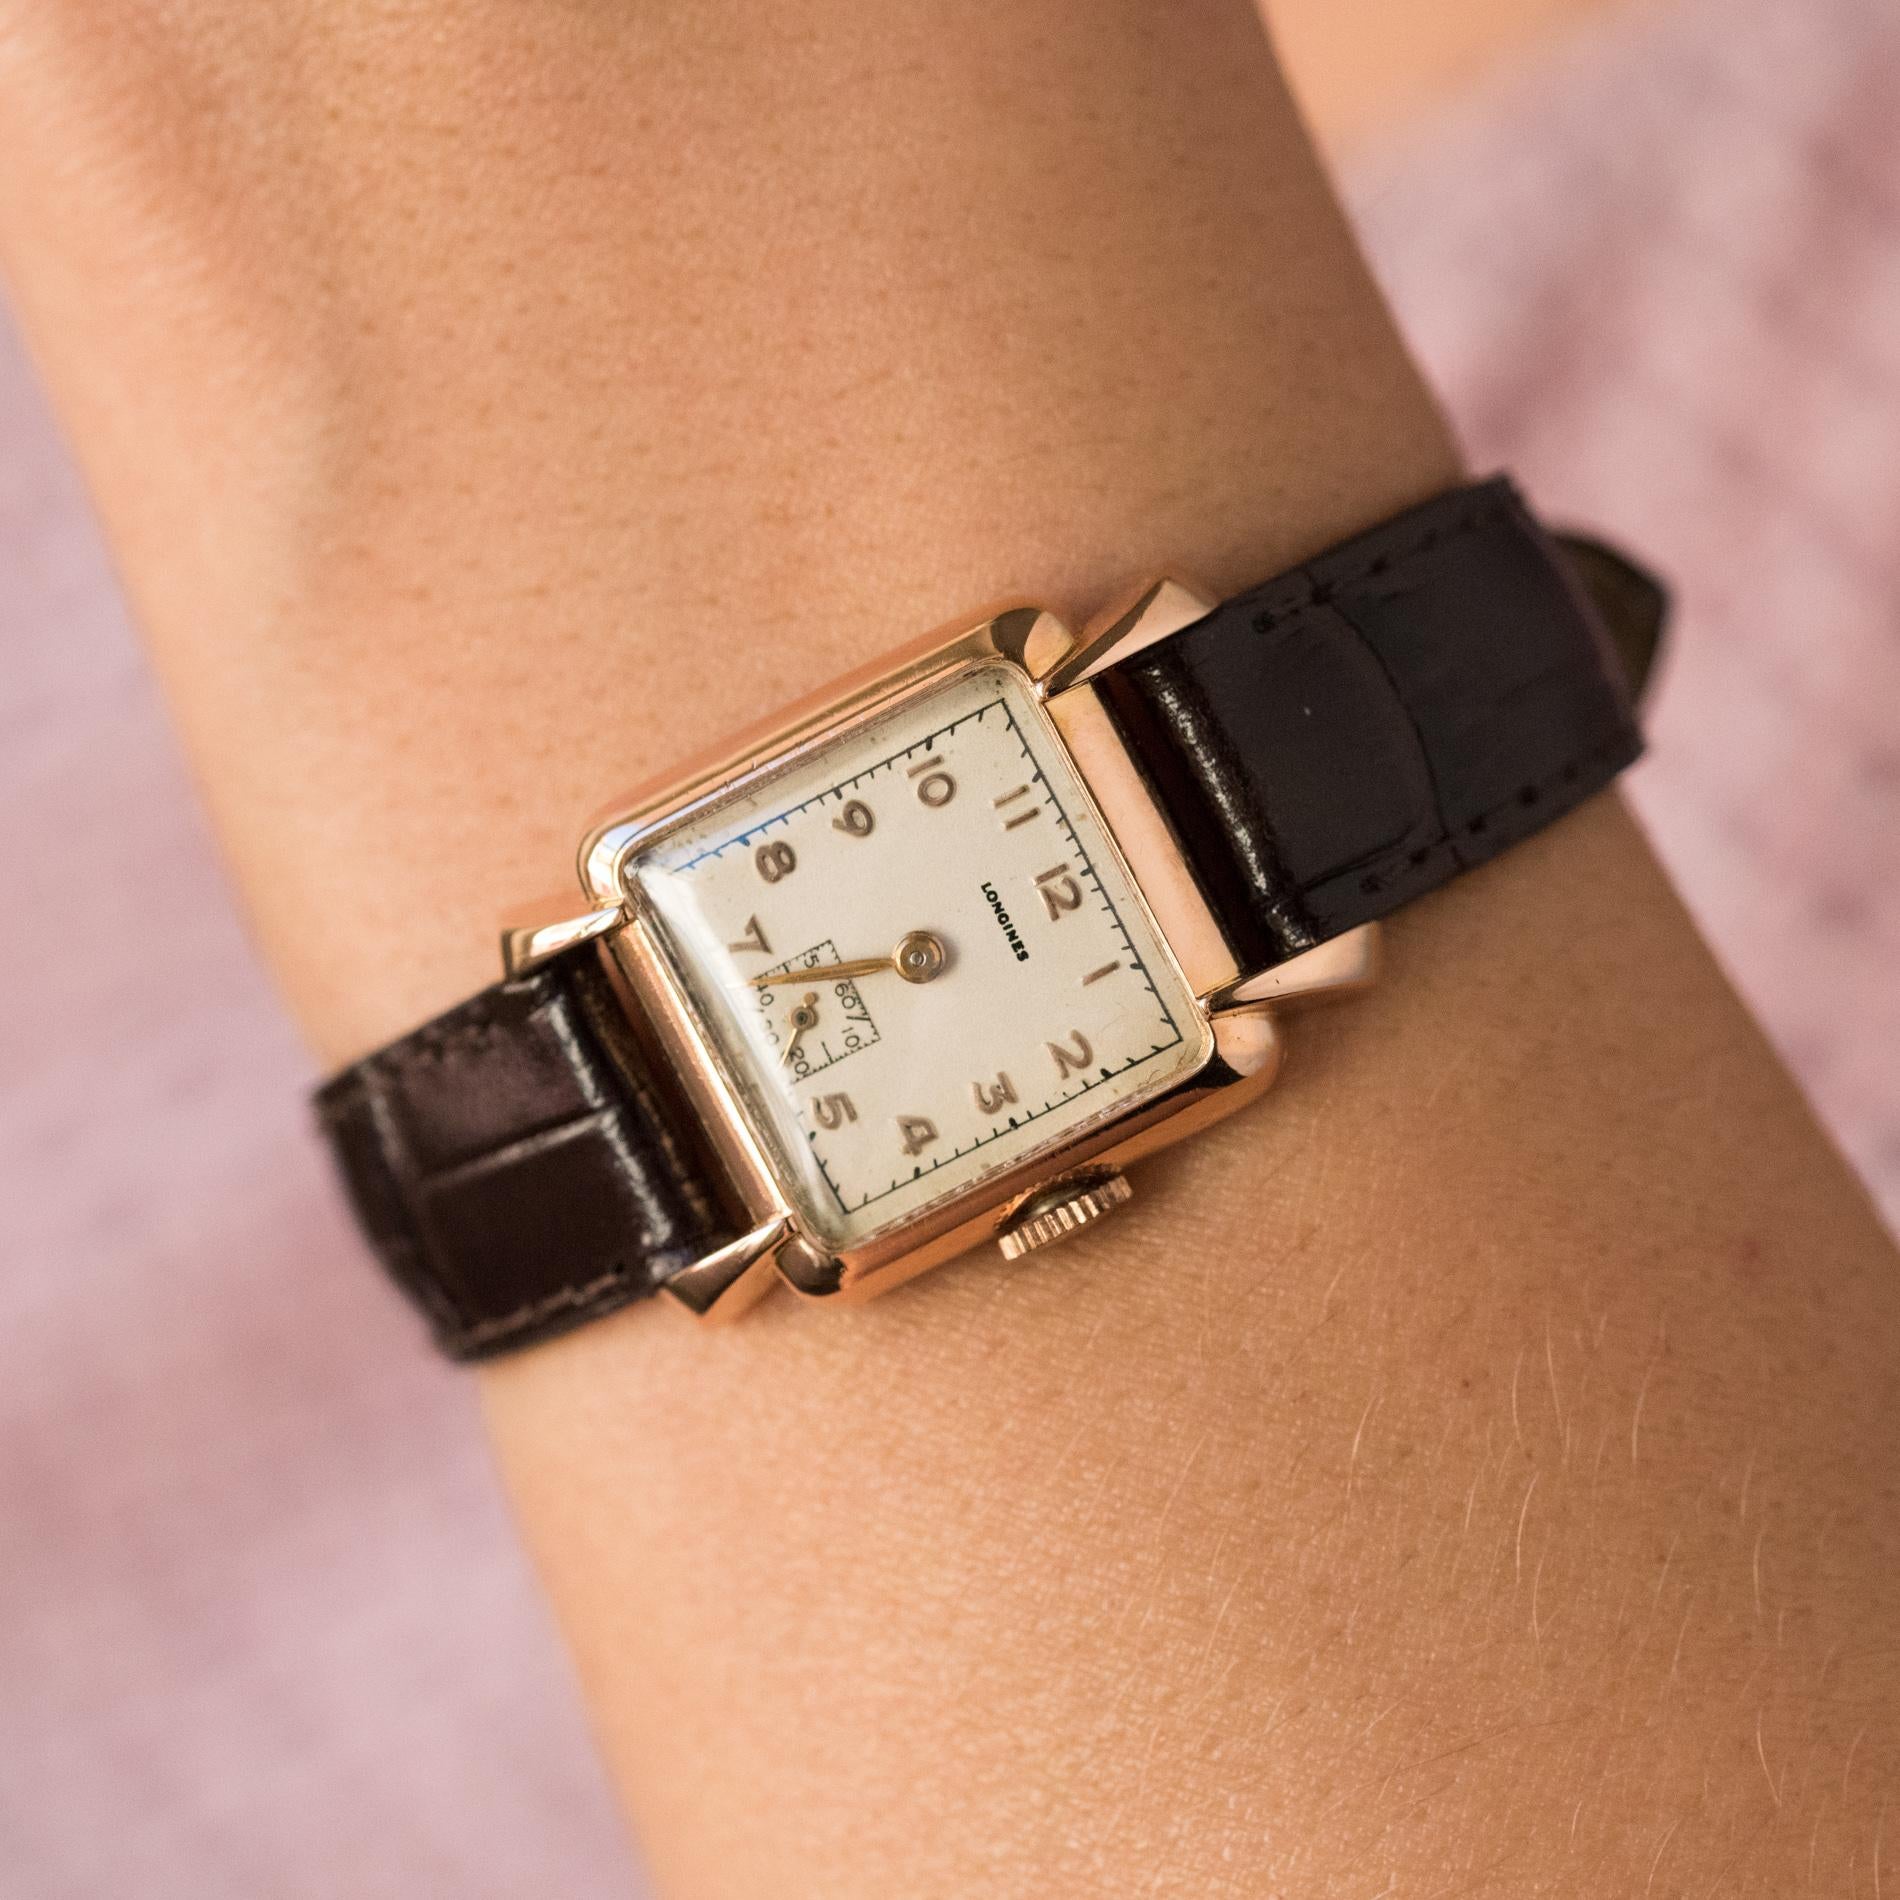 Ladies' wristwatch in 18 karats rose gold.
The square shape box, has a cream amati background, with Arabic numerals. The seconds dial is at 6 o'clock.
The bracelet is new, in black crocodile style with buckle.
Longines brand on the dial.
Mechanical